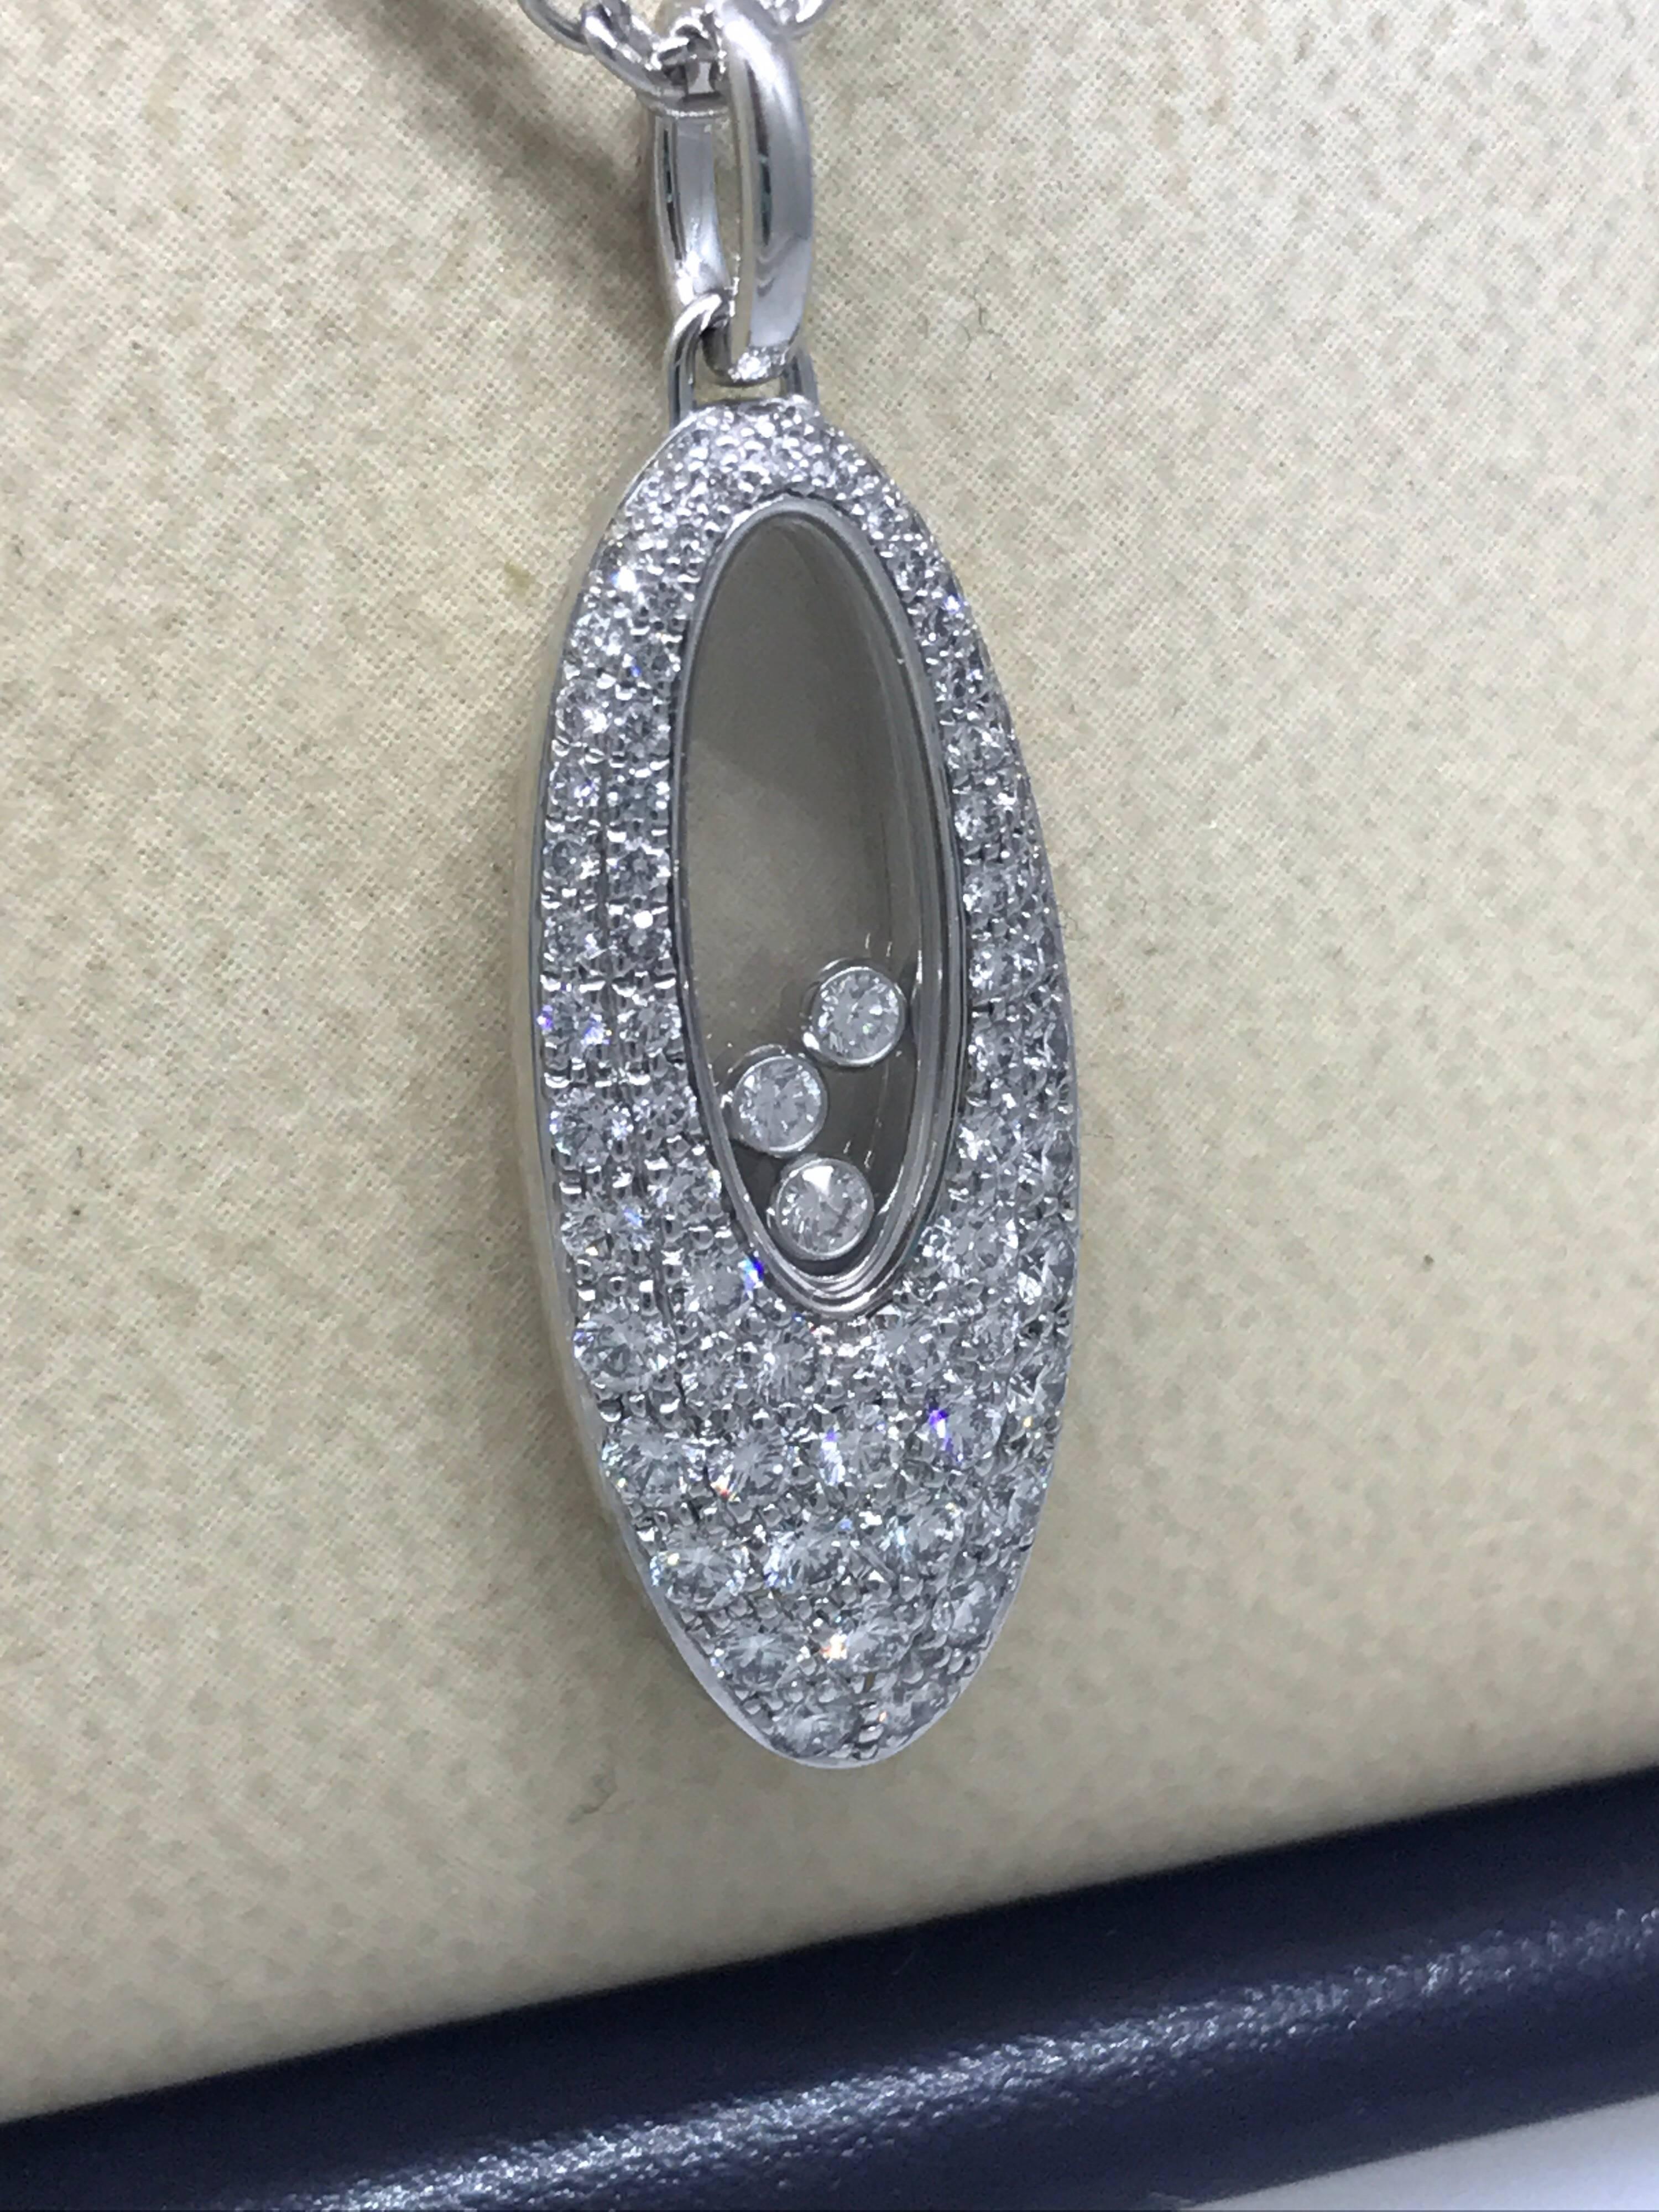 Chopard Happy Diamonds Oval Pendant / Necklace

Model Number: 79/7782-1201

100% Authentic

Brand New

Comes with original Chopard box, certificate of authenticity and warranty and jewels manual

18 Karat White Gold (11.81gr)

68 Diamonds on the